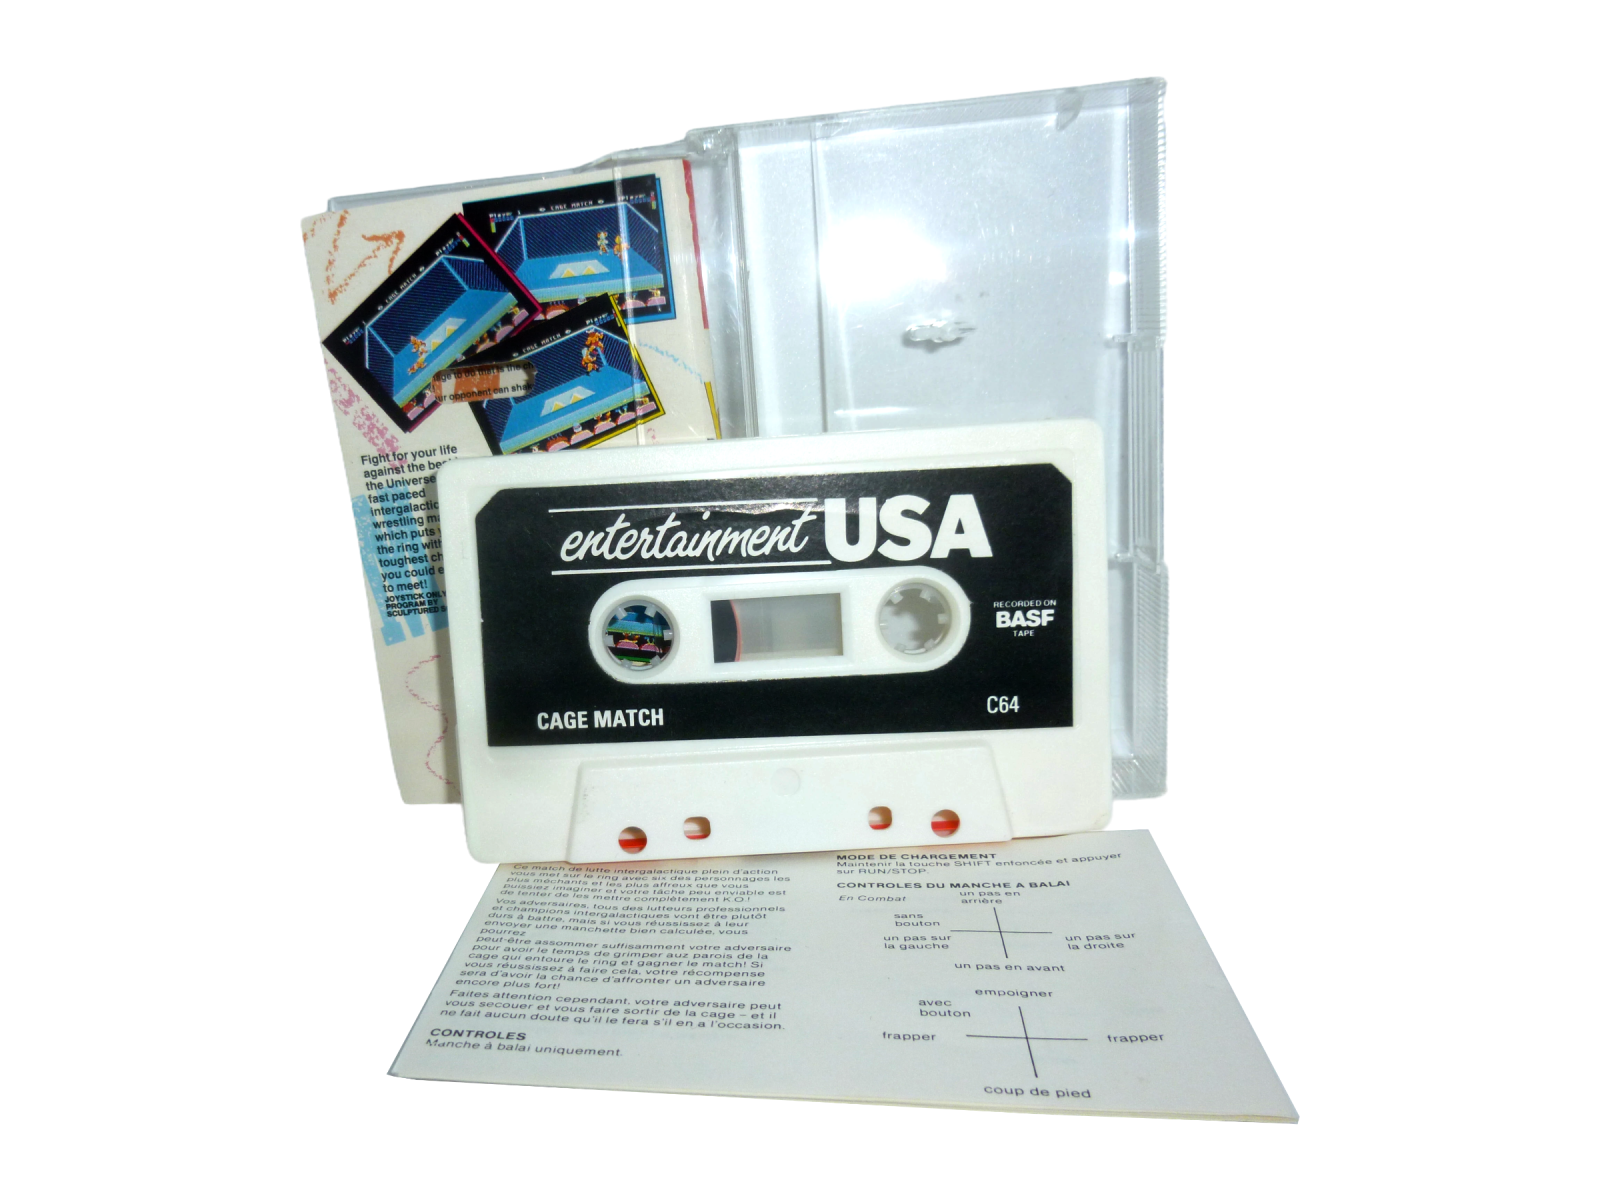 Cage Match - Cassette / Datasette entertainmeent USA 2